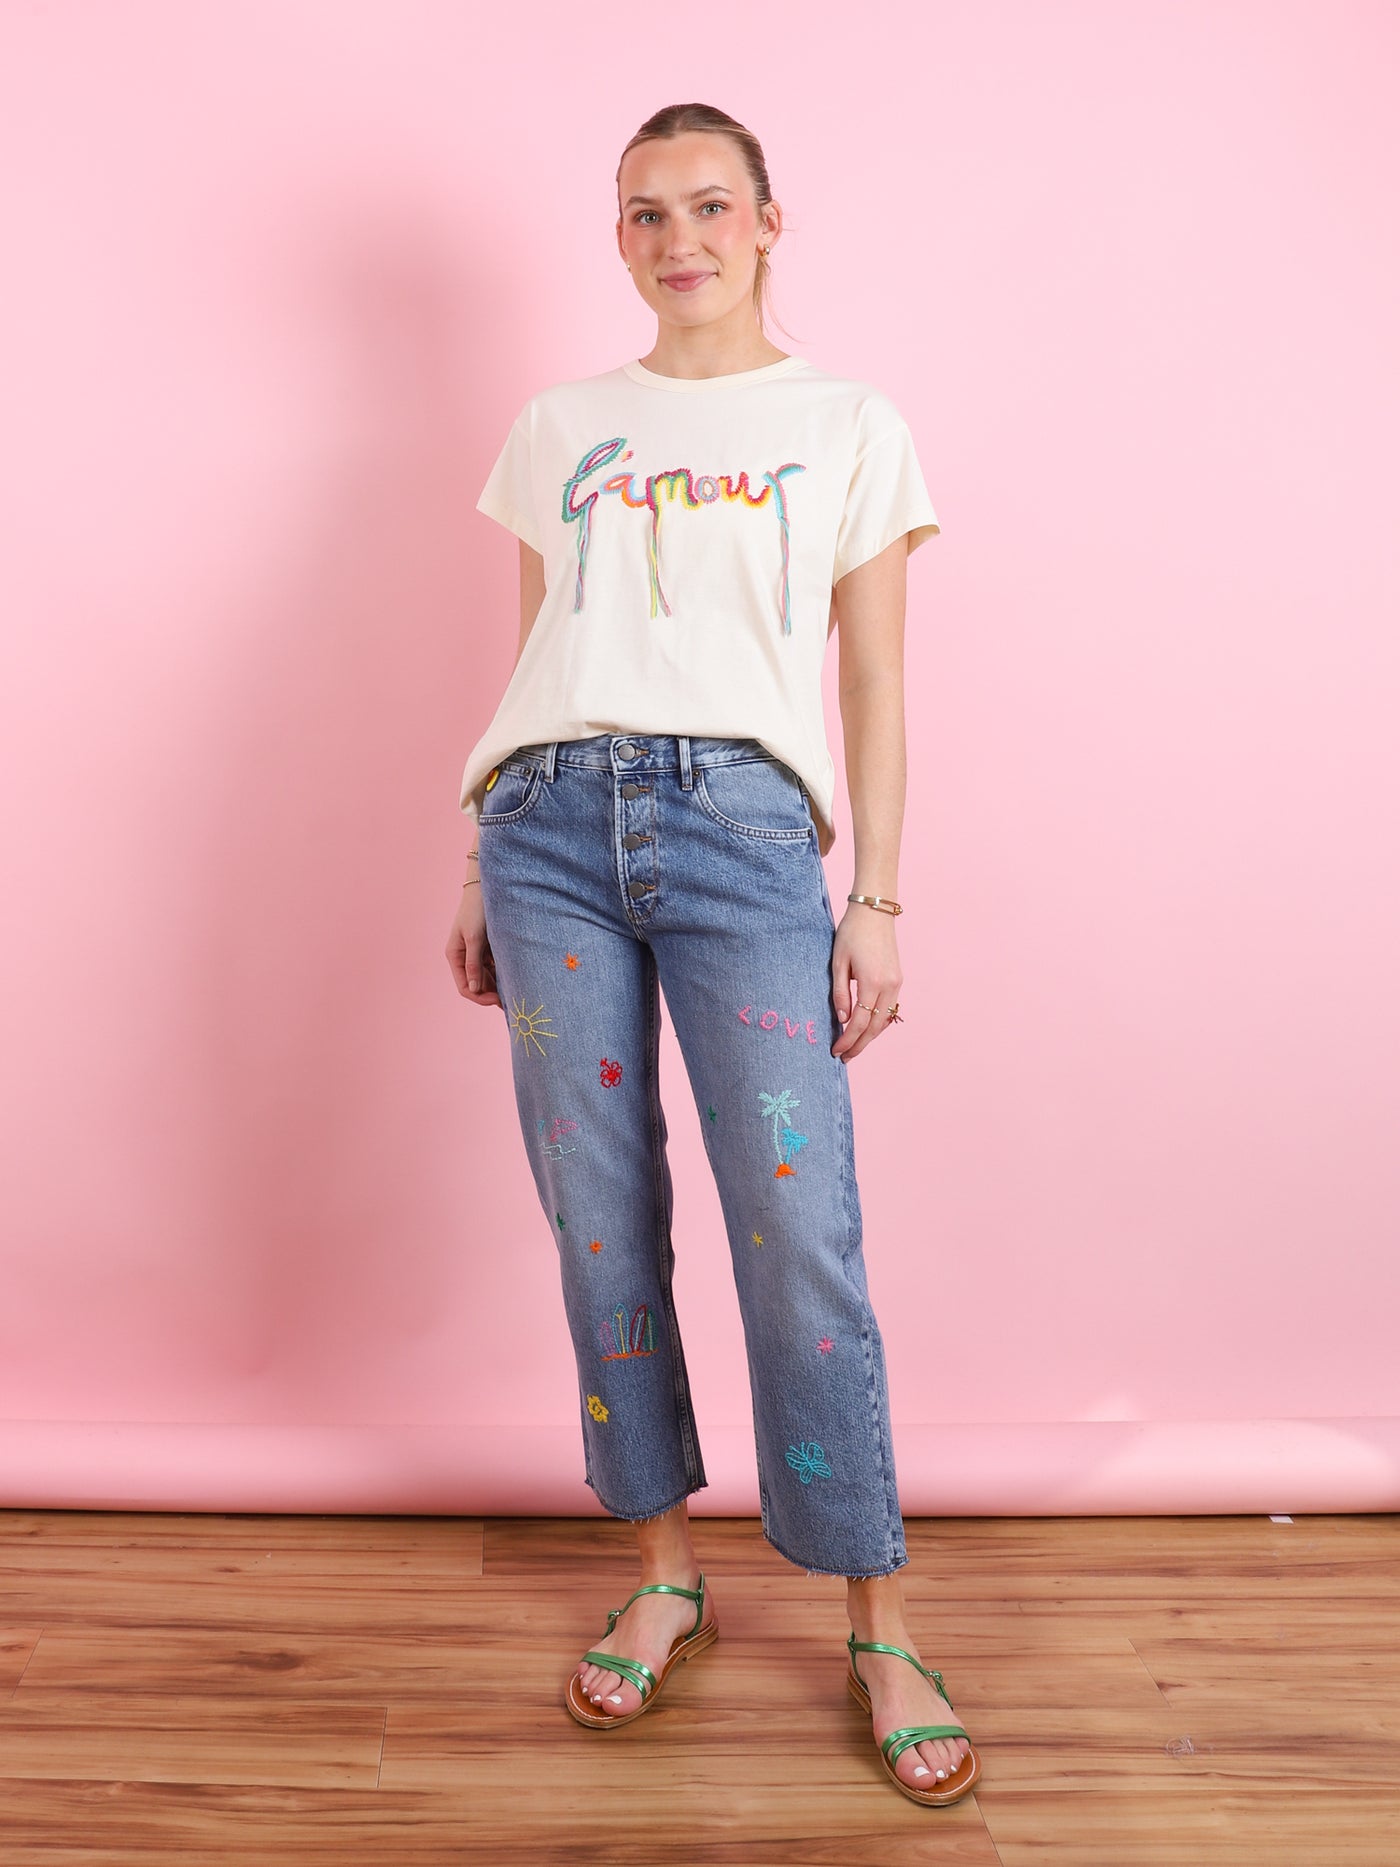 L'Amour Embroidered T-Shirt